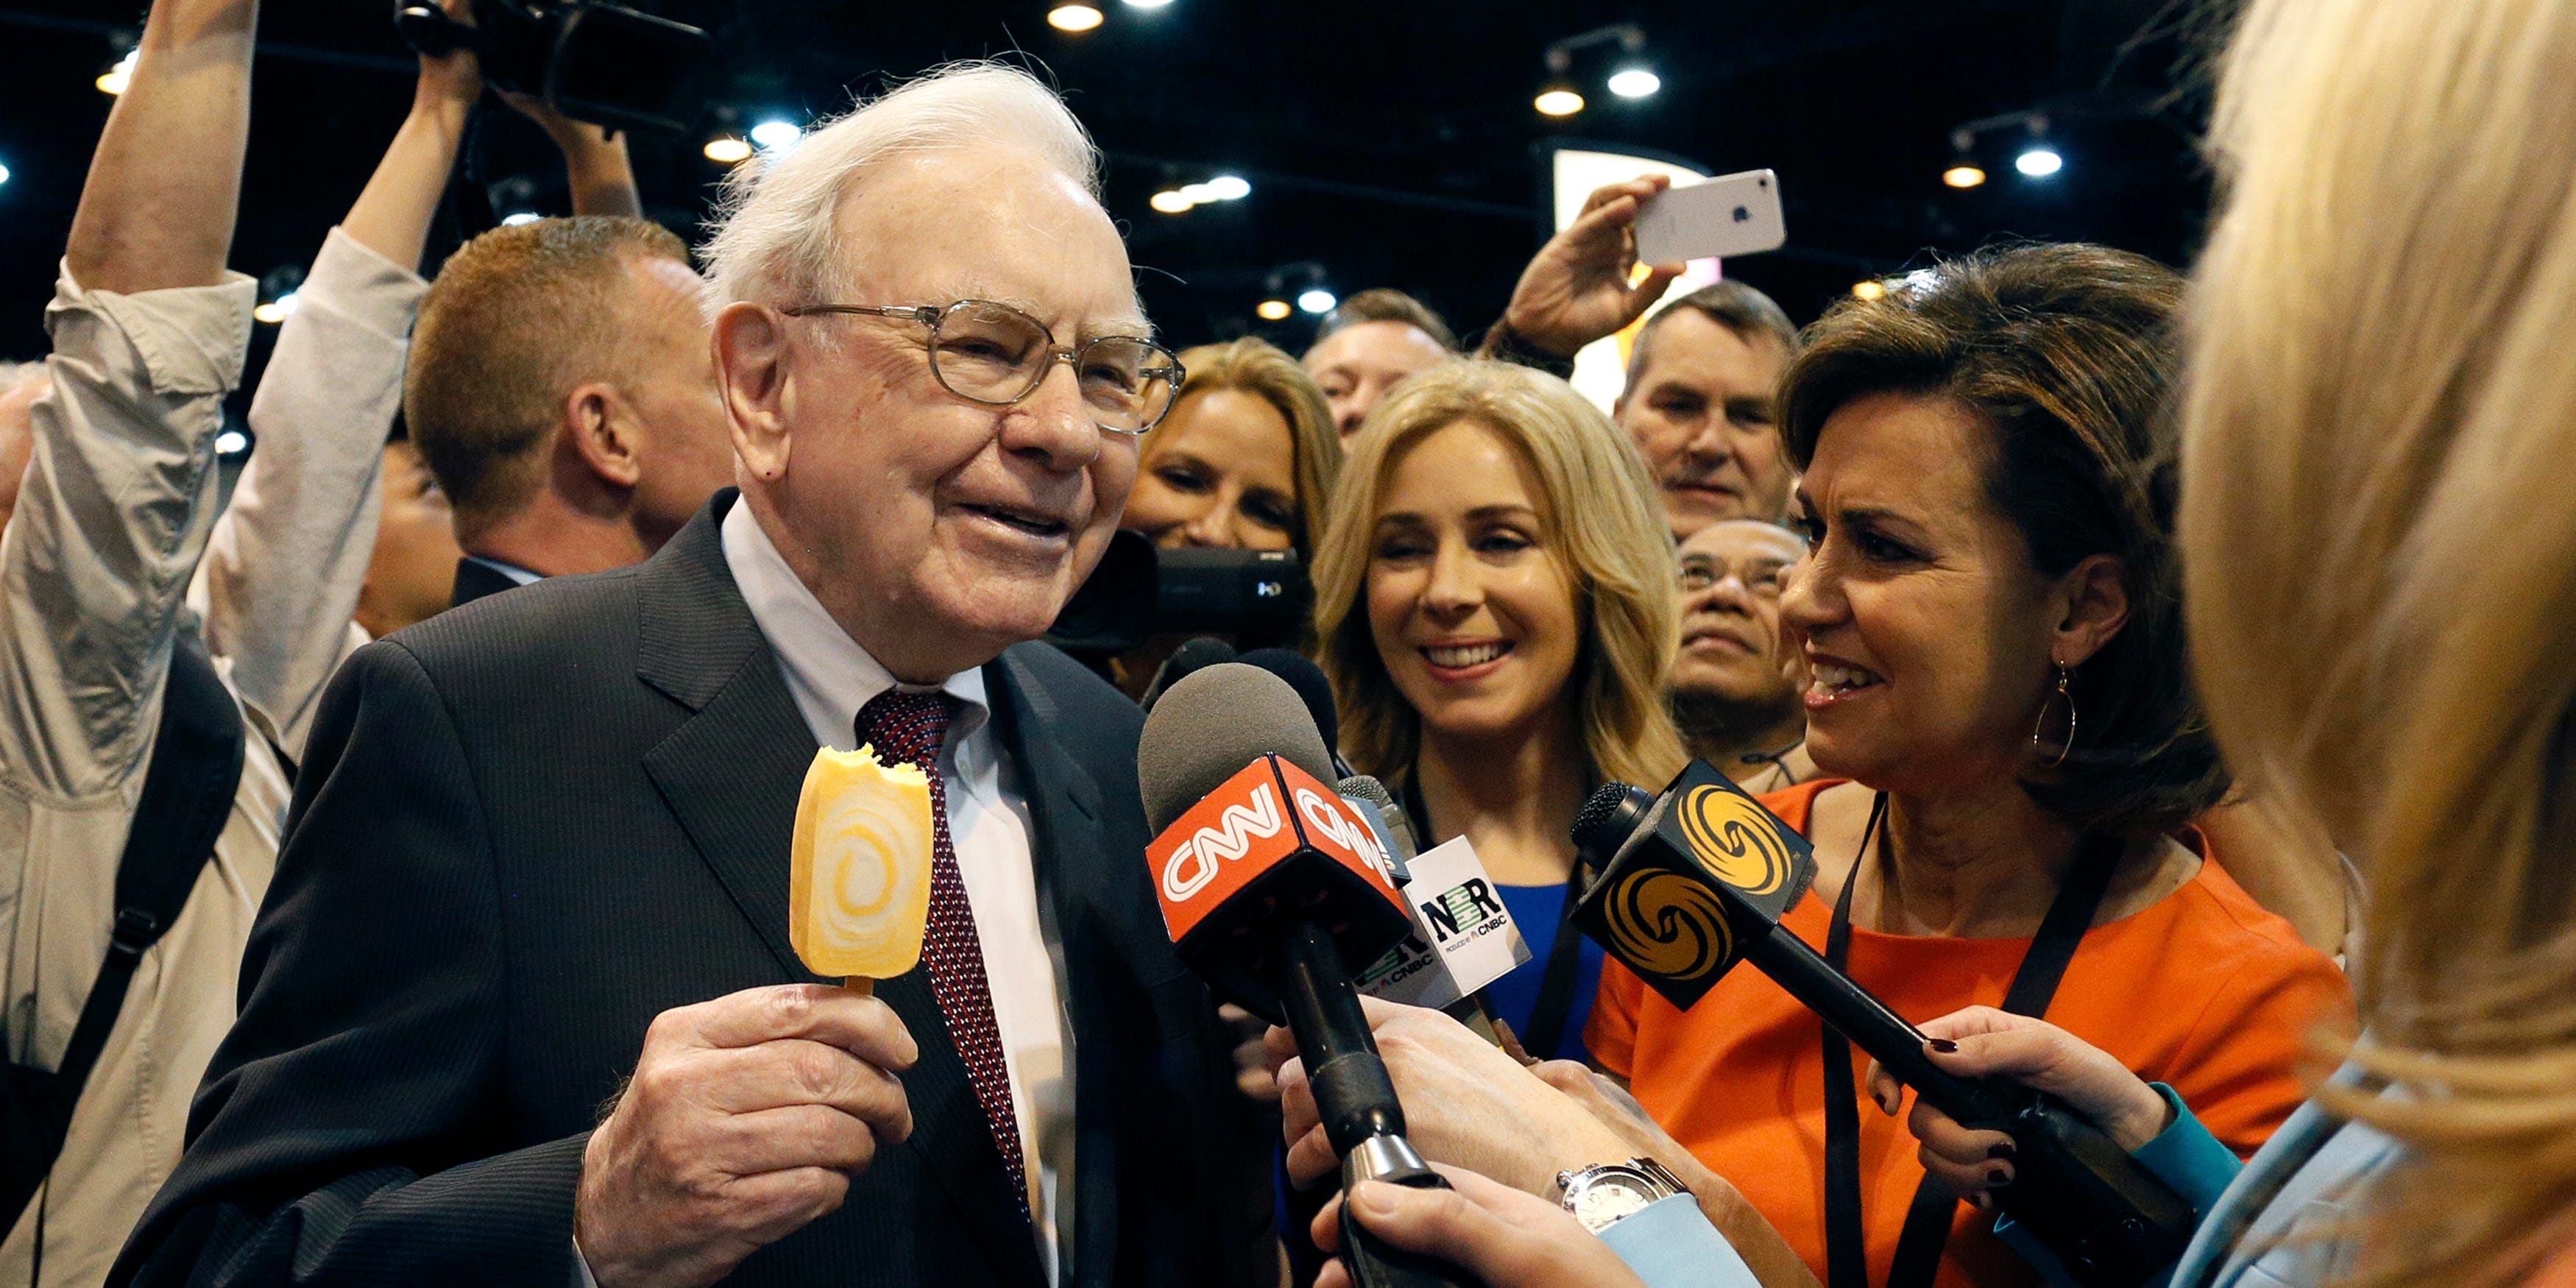 microsoft, warren buffett warned on ai scams, a fiscal disaster, and losing friends. here are 15 top quotes from berkshire's bash.